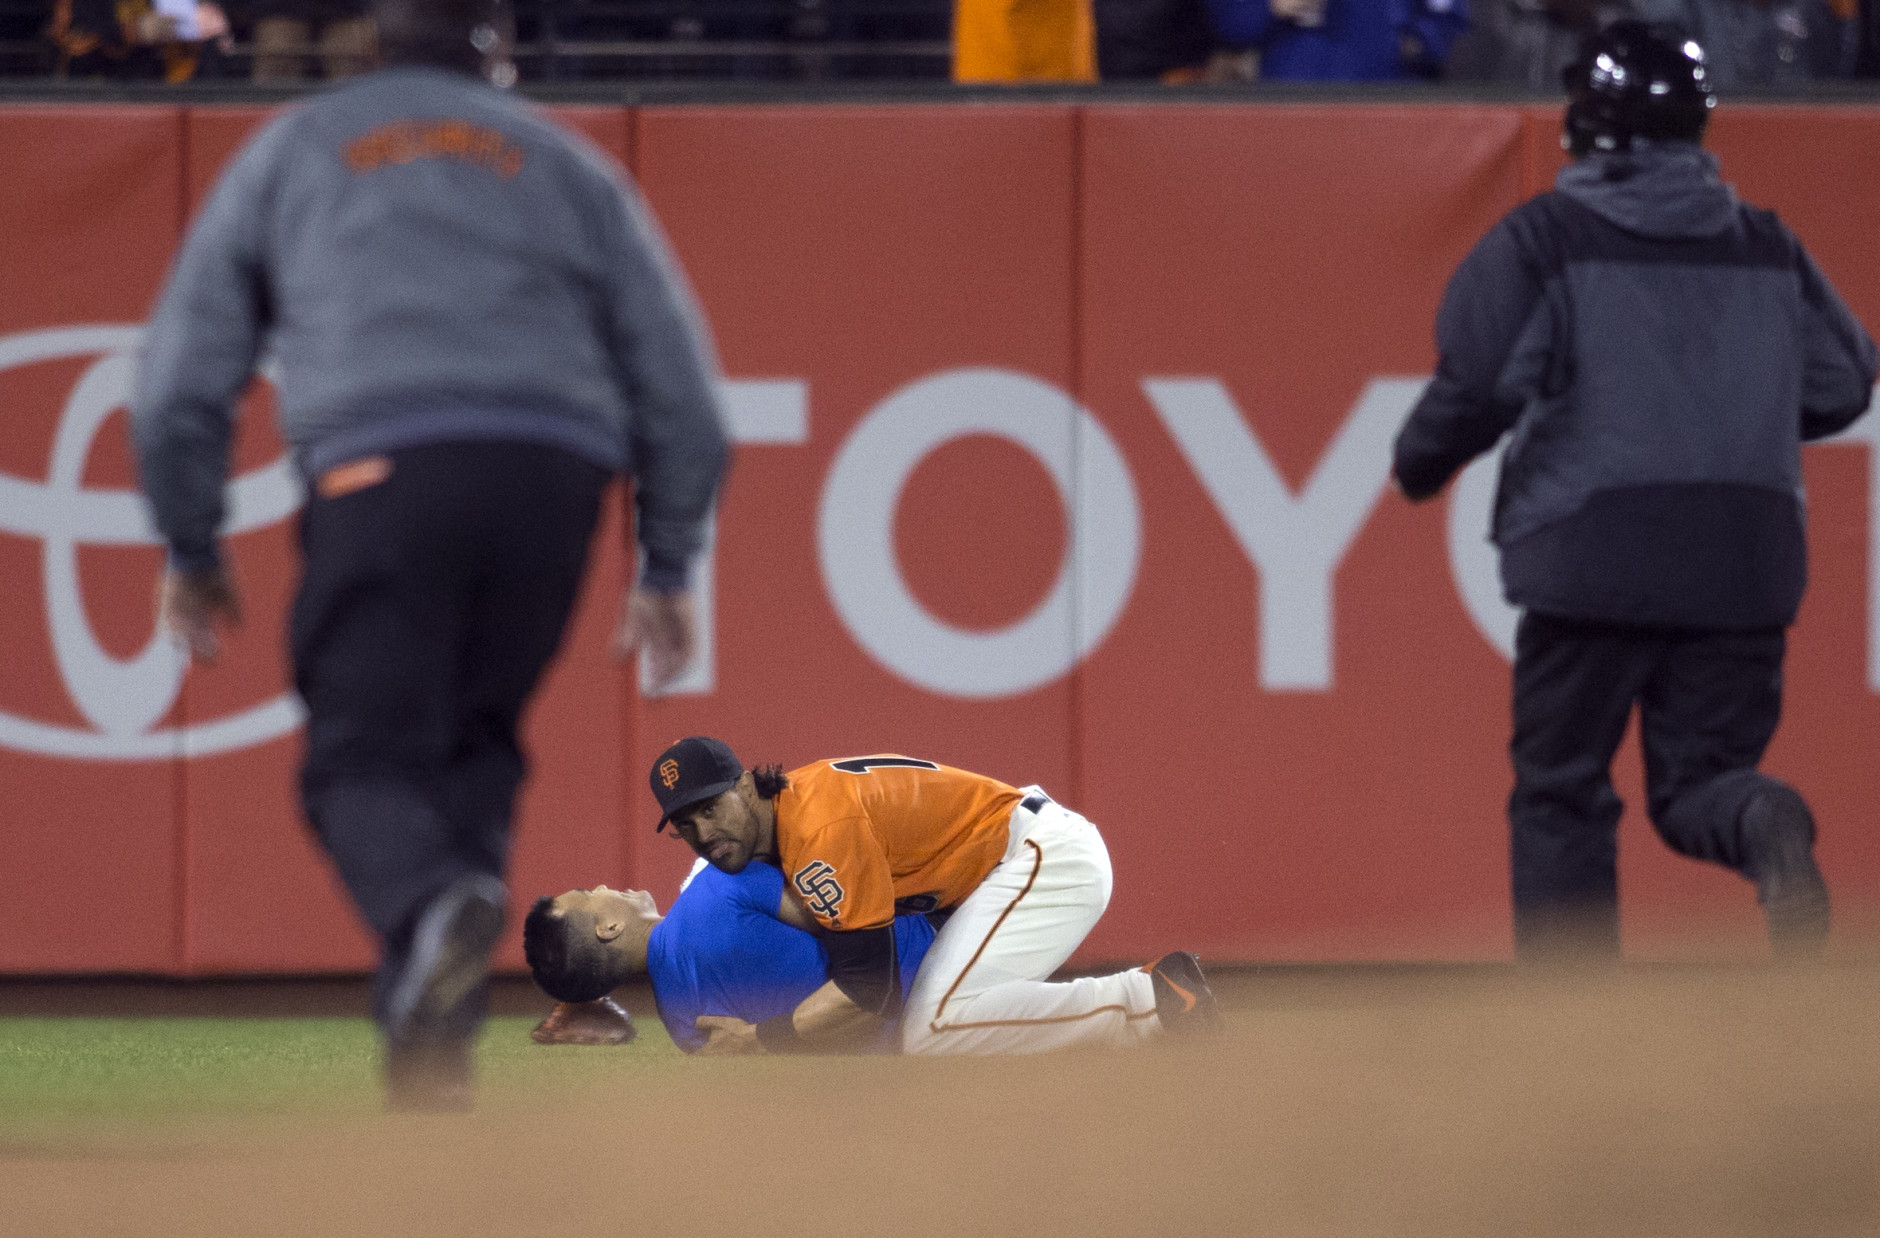 San Francisco Giants’ Angel Pagan (16) holds down a man who ran onto the field during the fourth inning of the Giants' baseball game against the Los Angeles Dodgers, Friday, Sept. 30, 2016, in San Francisco. (AP Photo/D. Ross Cameron)